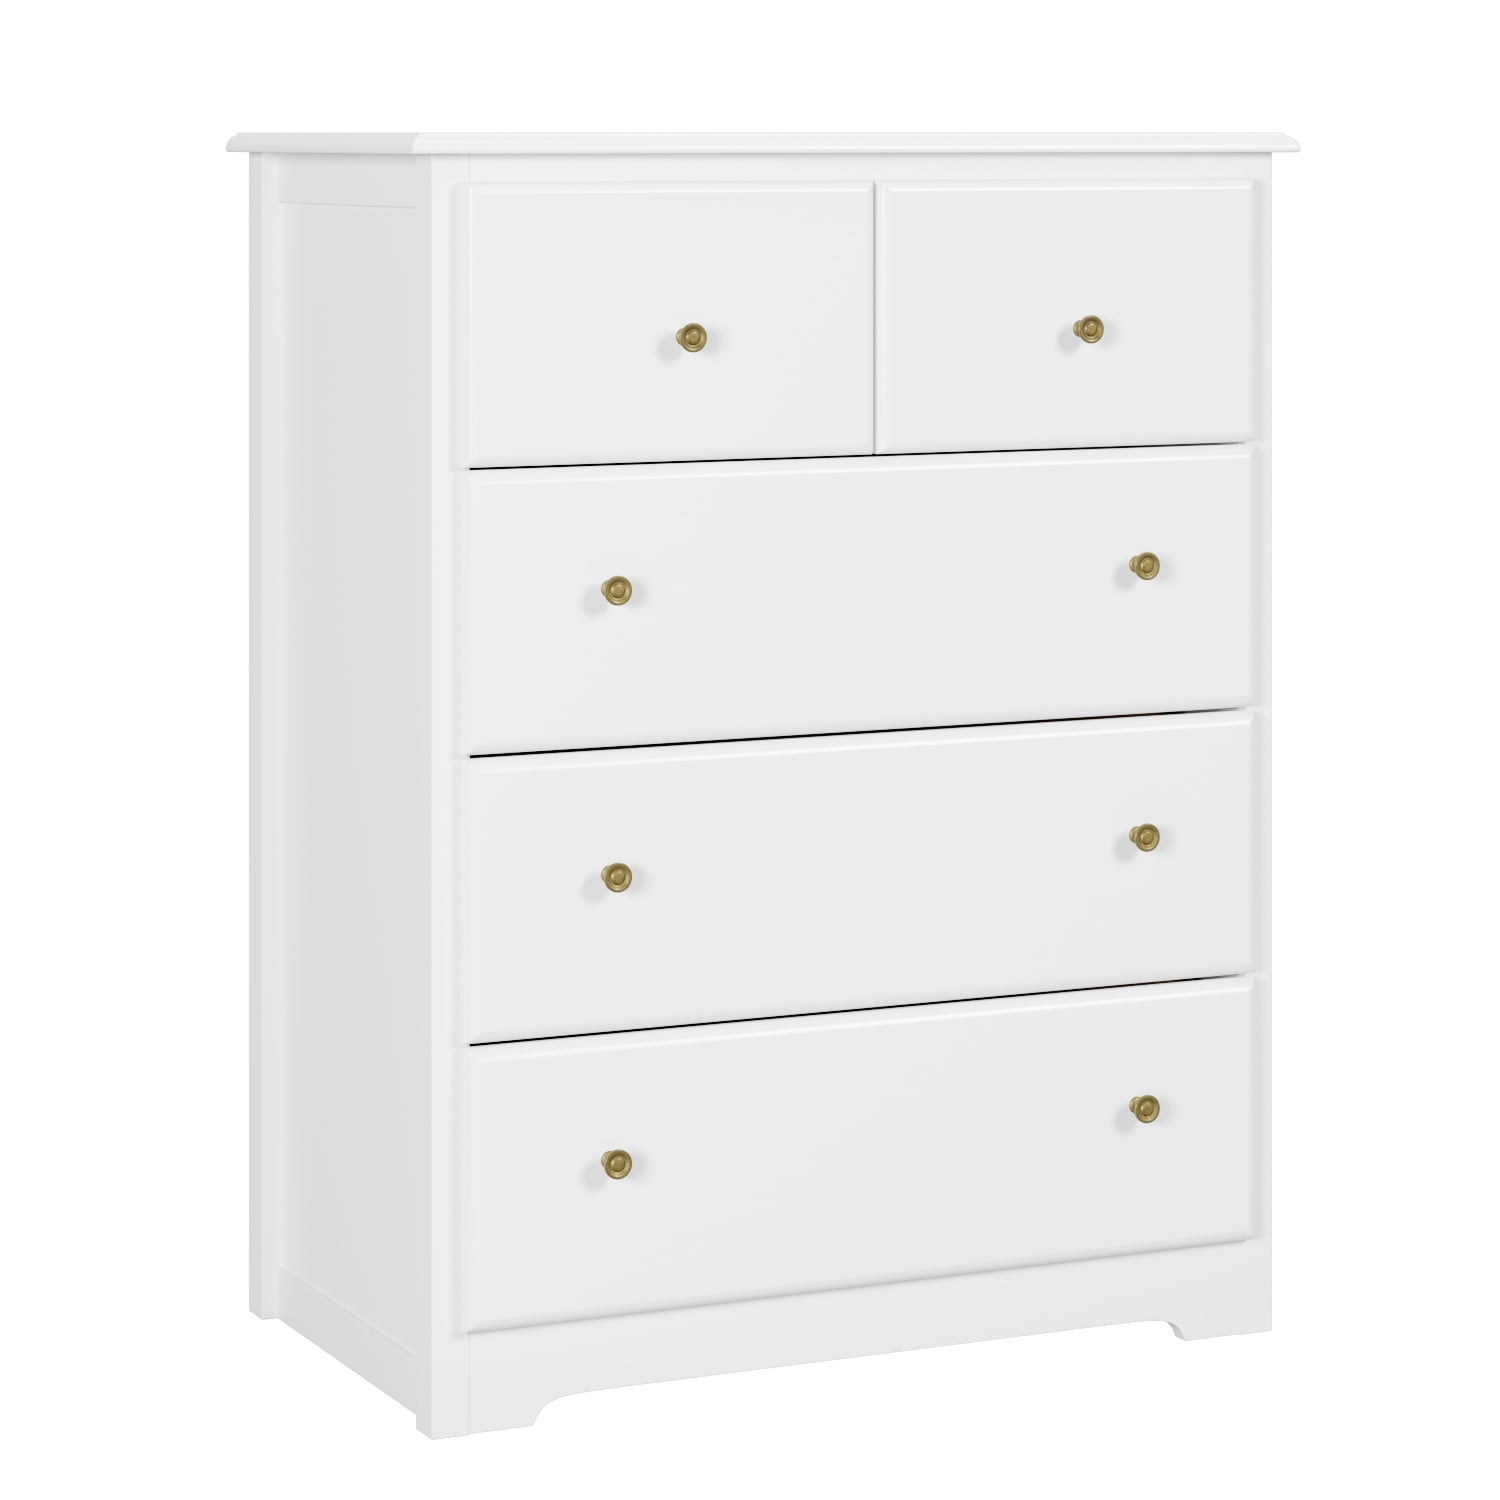 Homsee Tall 5 Drawer Dresser Storage Chest, Modern Dresser Chest of Drawers  Nursery Dresser with Stylish Drawer Fronts & Solid Legs for Bedroom